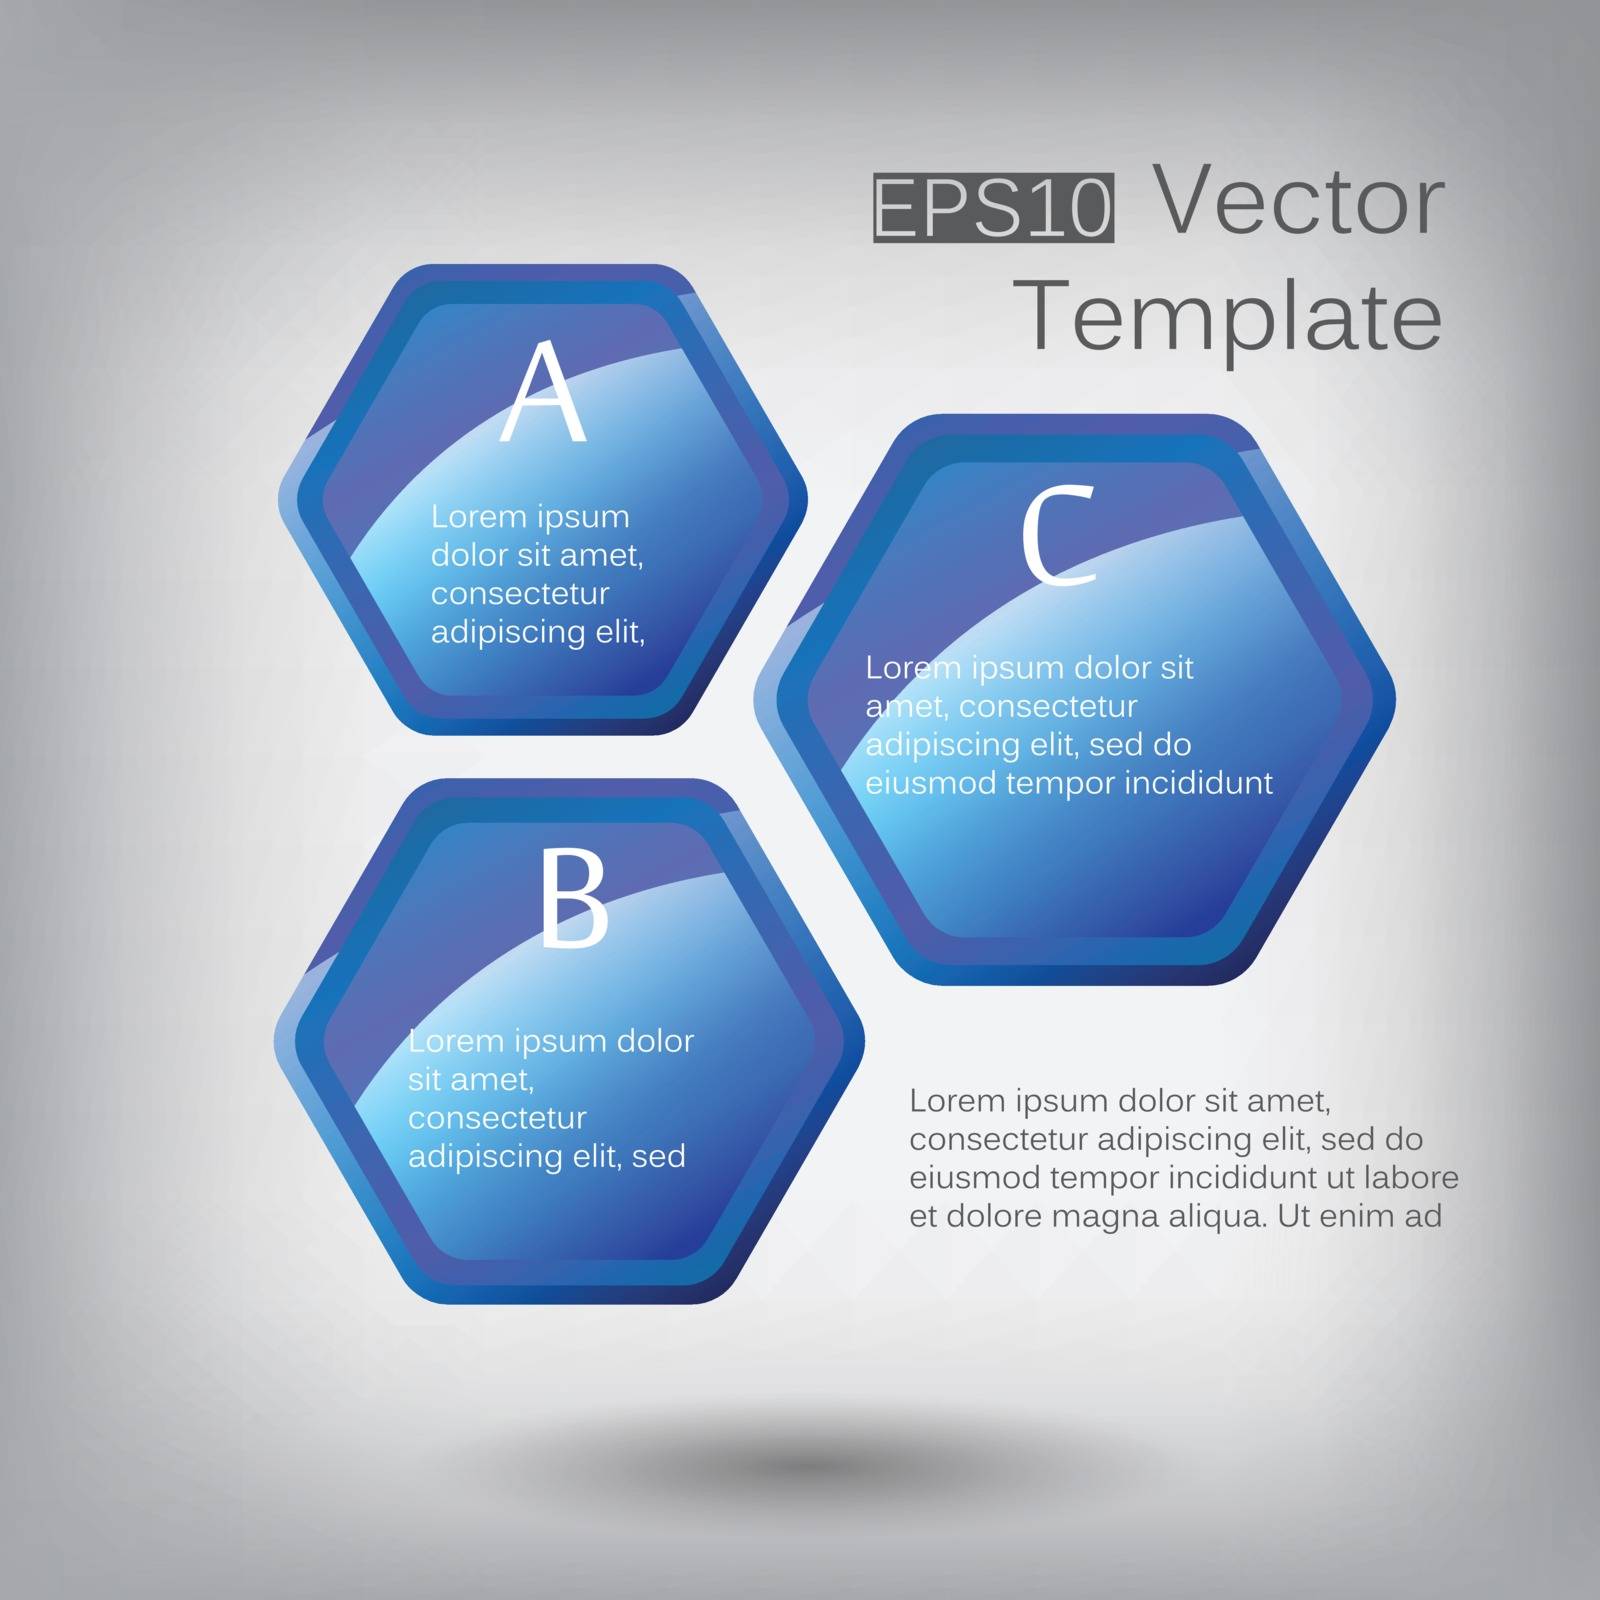 Vector 3d hexagon elements for infographic with icons